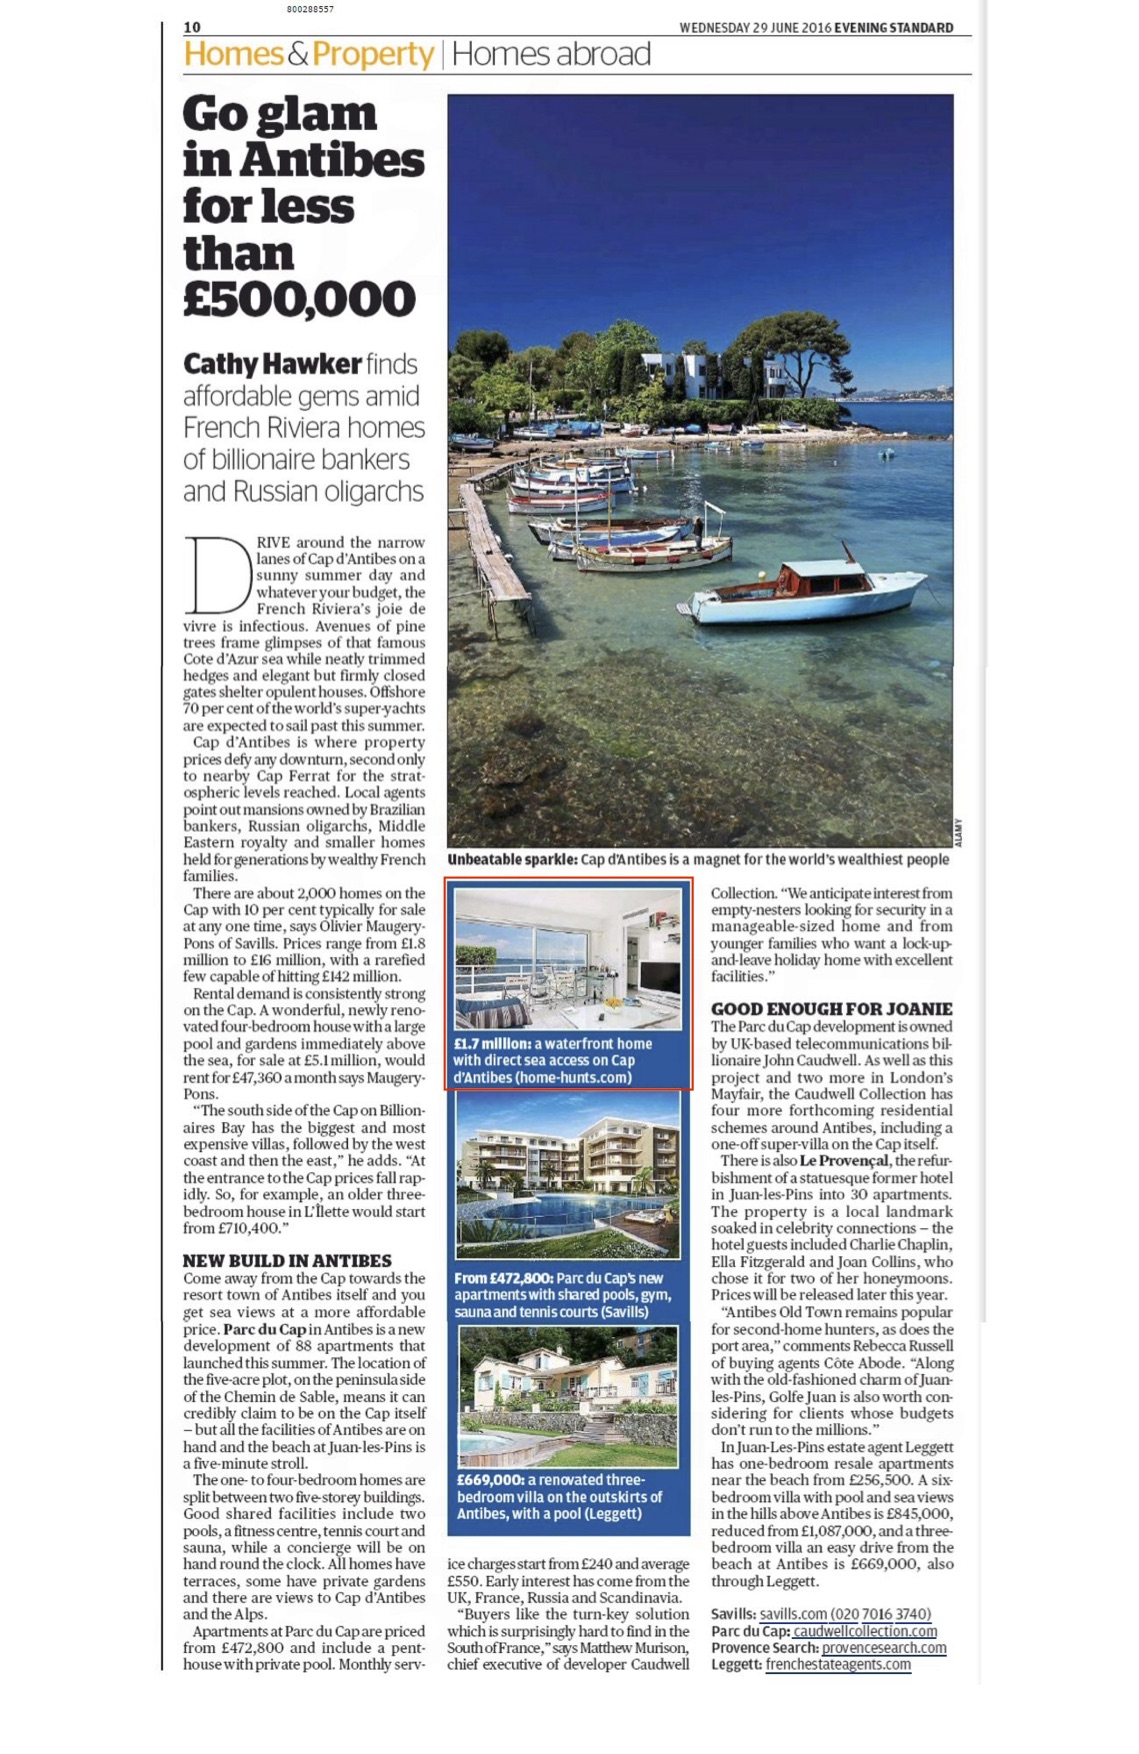 Evening Standard – Property on the French Riviera